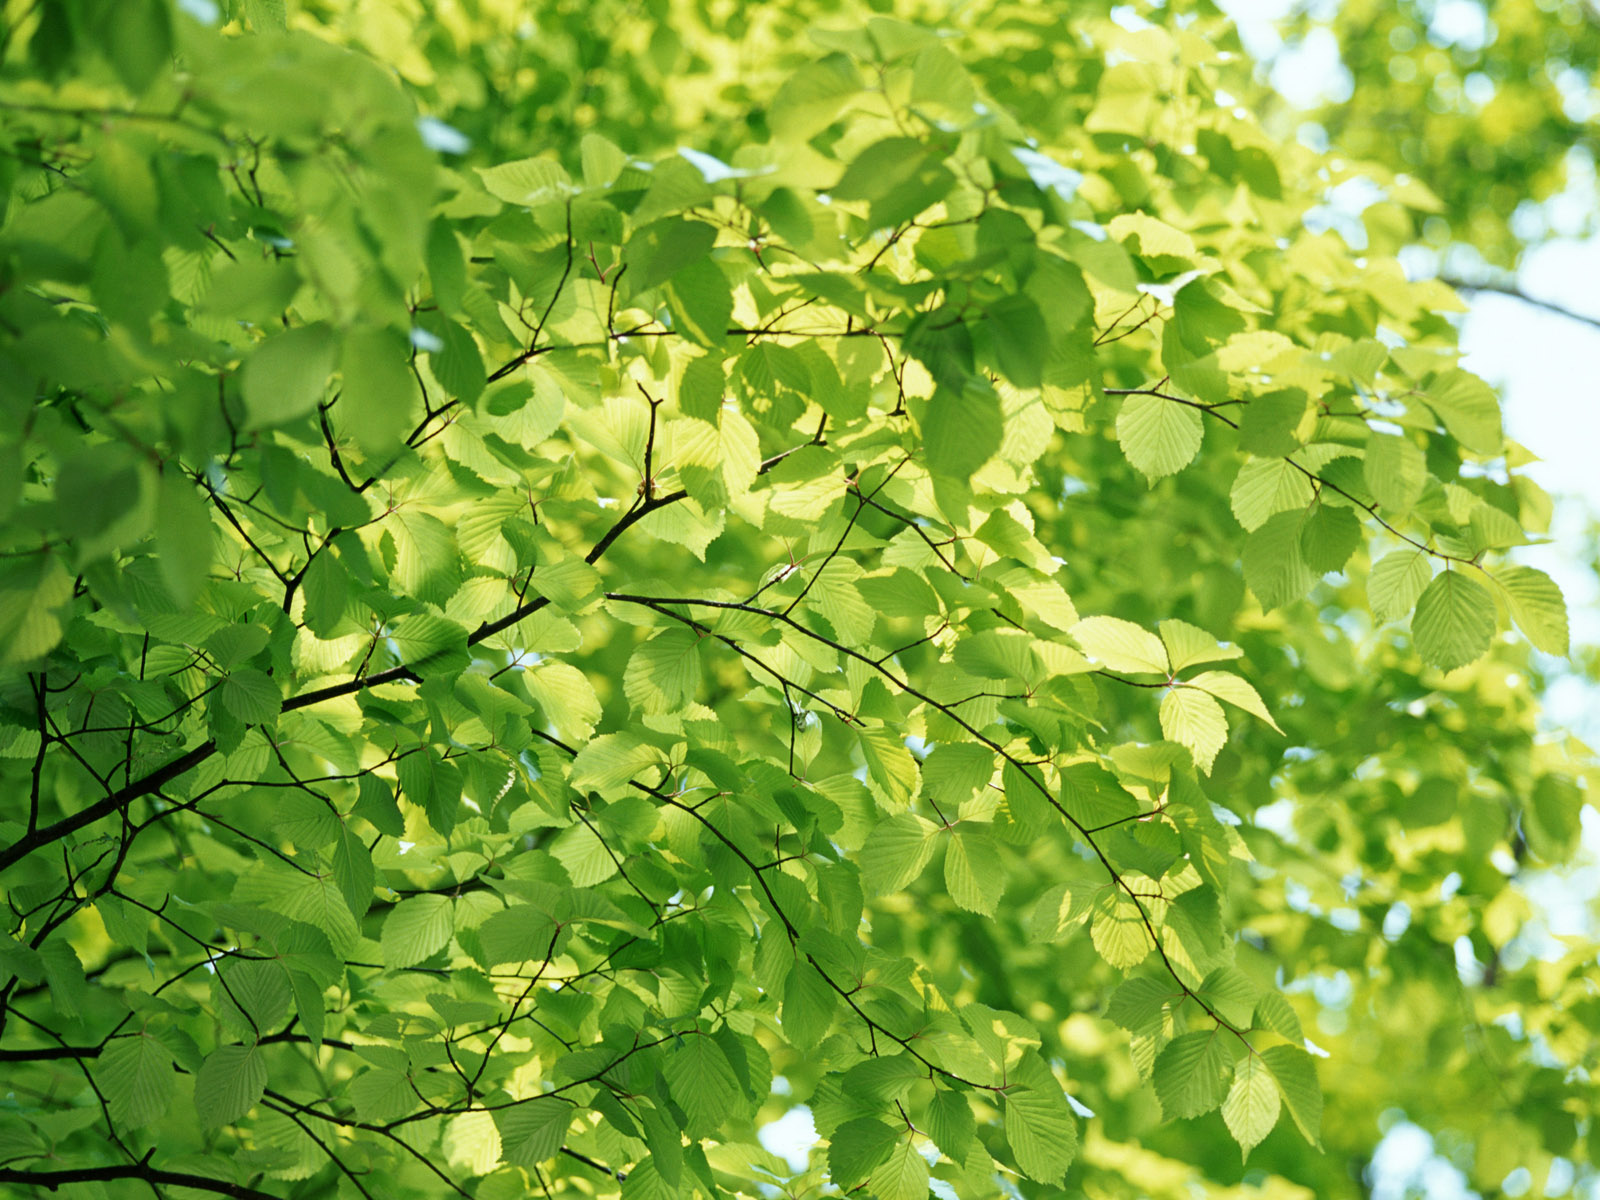 Wallpaper green background - Tree with Leaves - Green Wallpapers